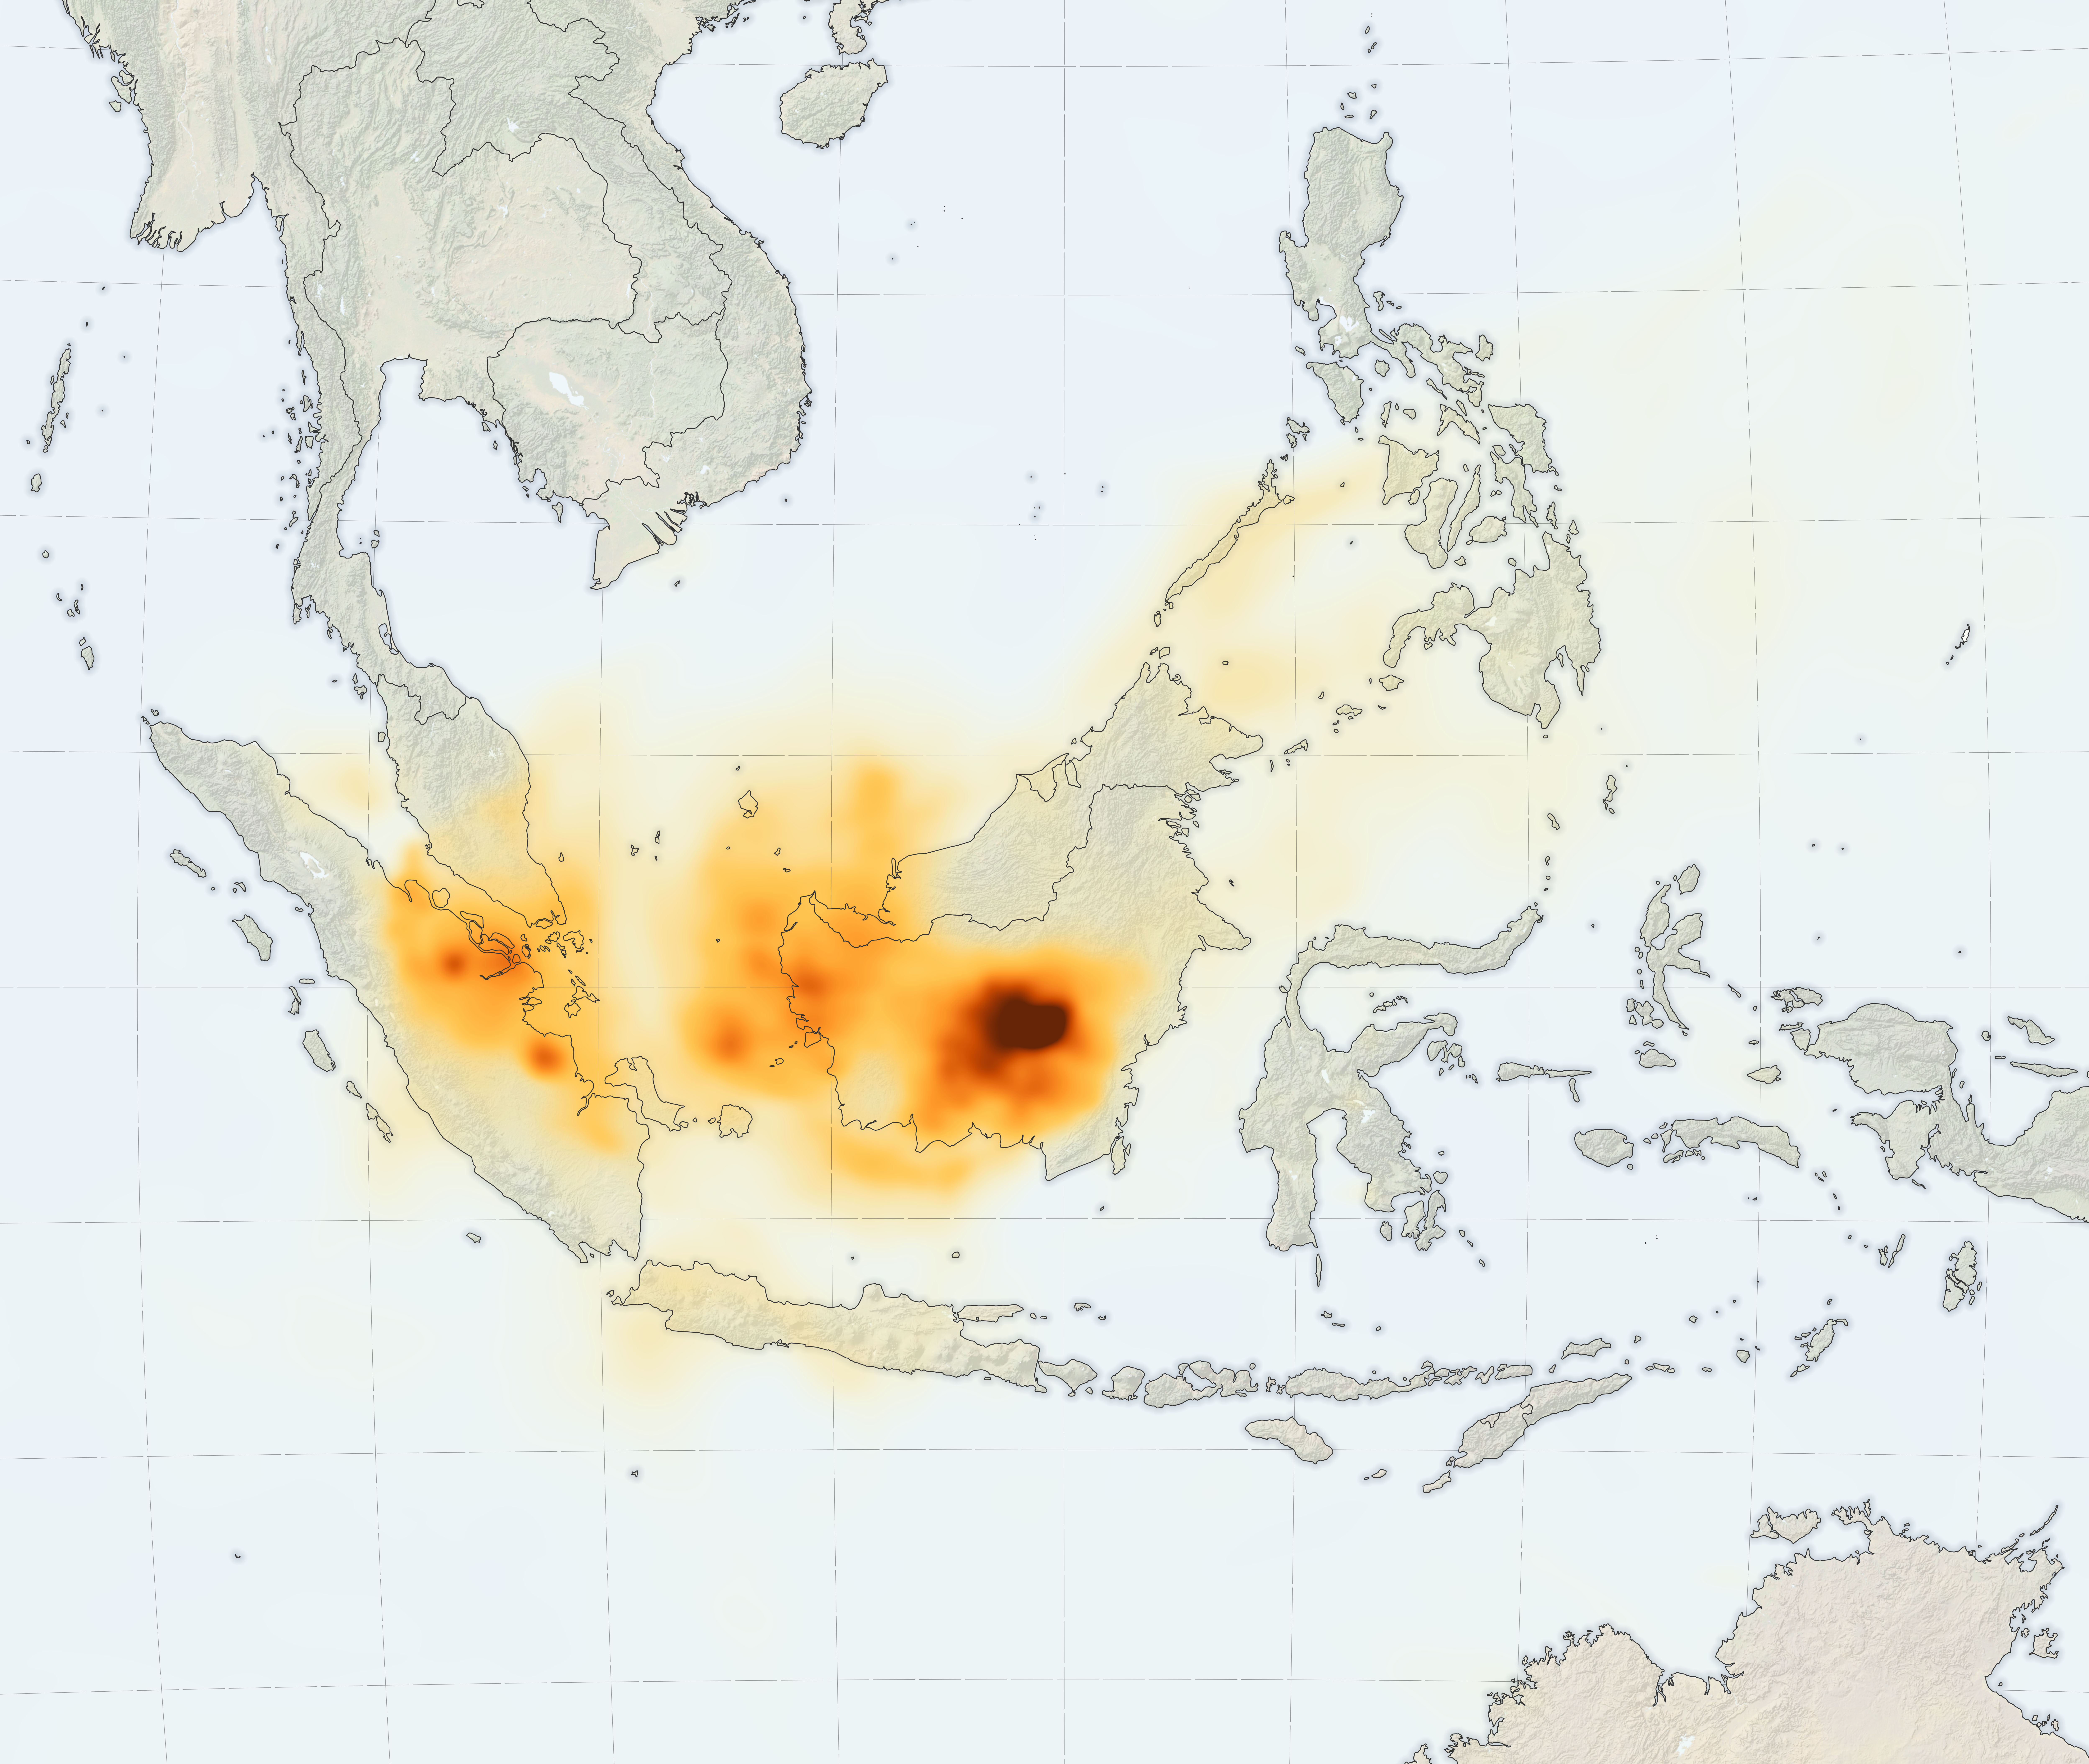 Carbon Data from September 17, 2019 over Indonesia